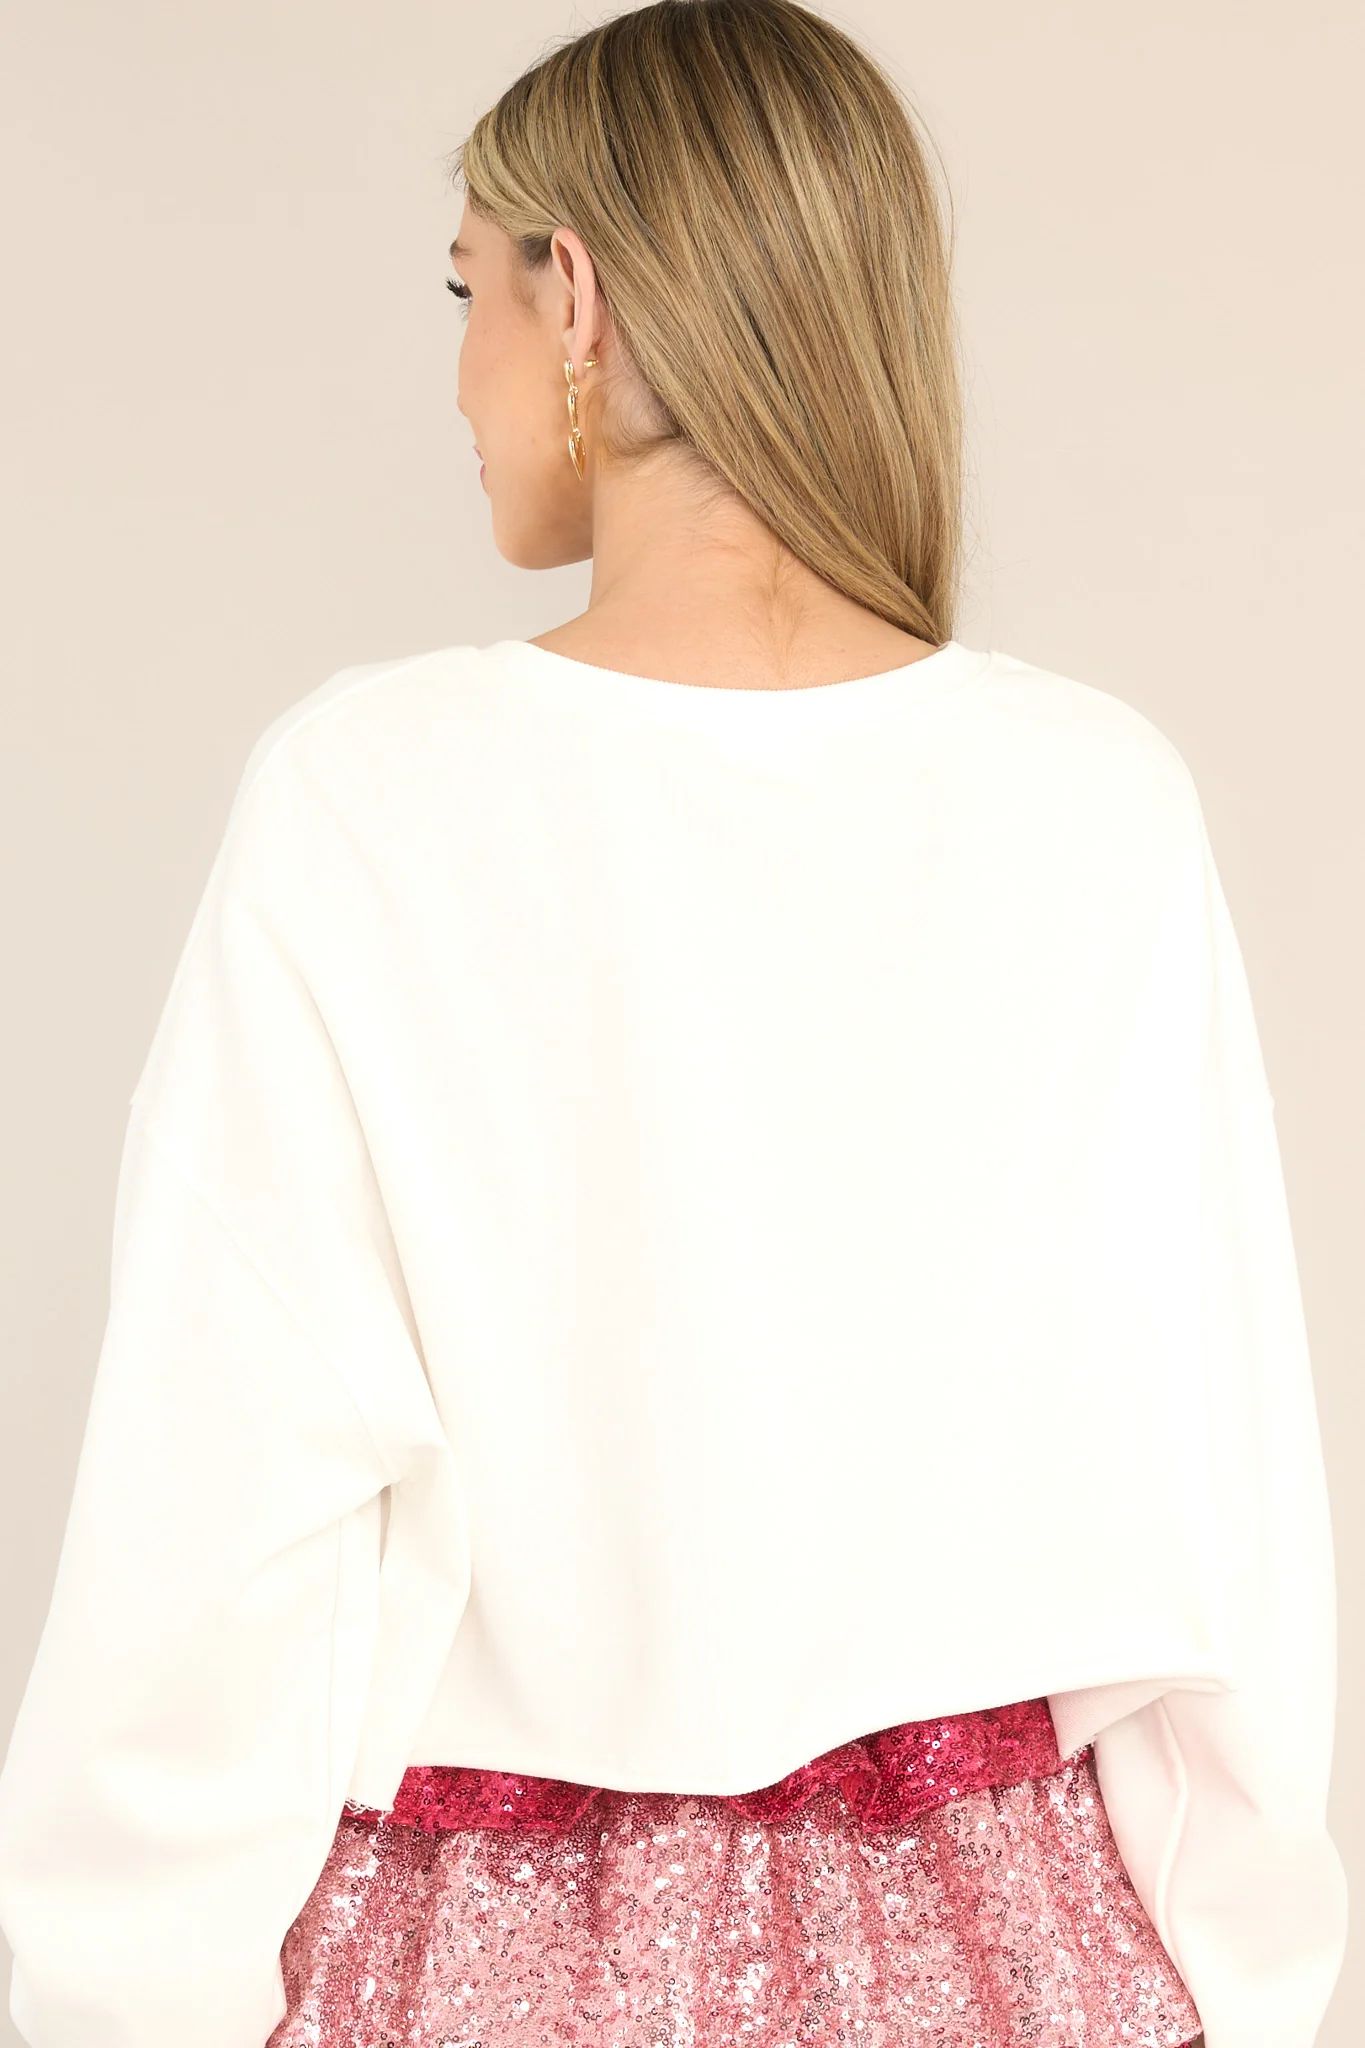 Thought Of You White XOXO Cropped Sweatshirt | Red Dress 